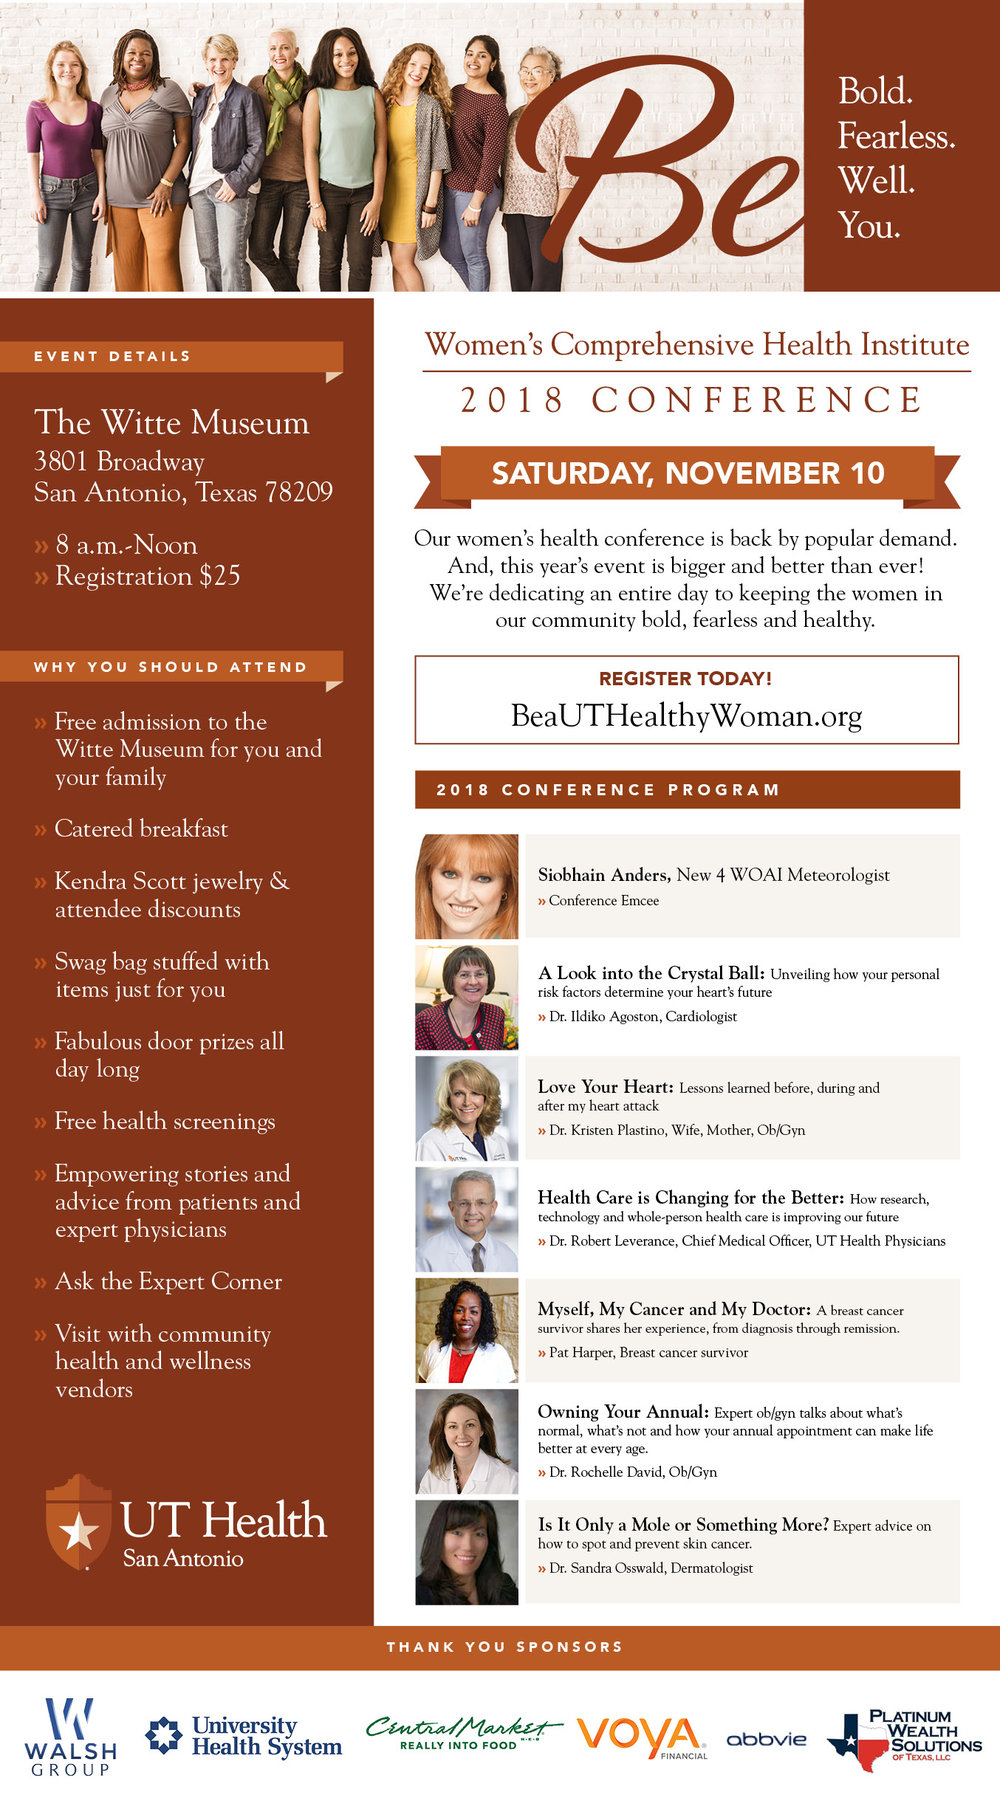 Image: UT Health Women's Comprehensive Health Conference on Nov. 10 - Click to Register Today